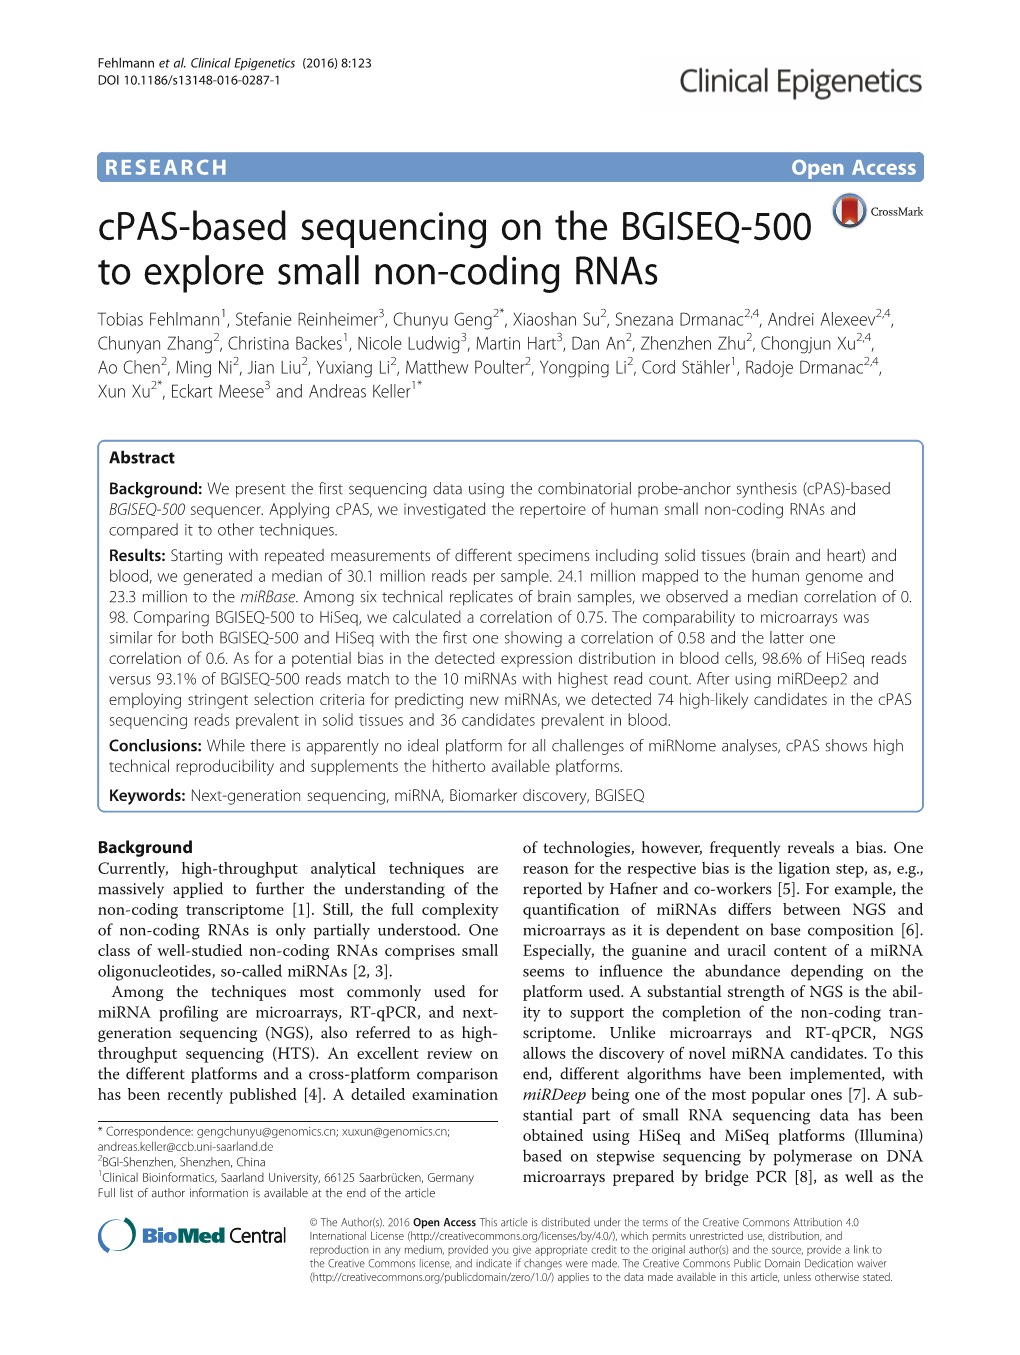 Cpas-Based Sequencing on the BGISEQ-500 to Explore Small Non